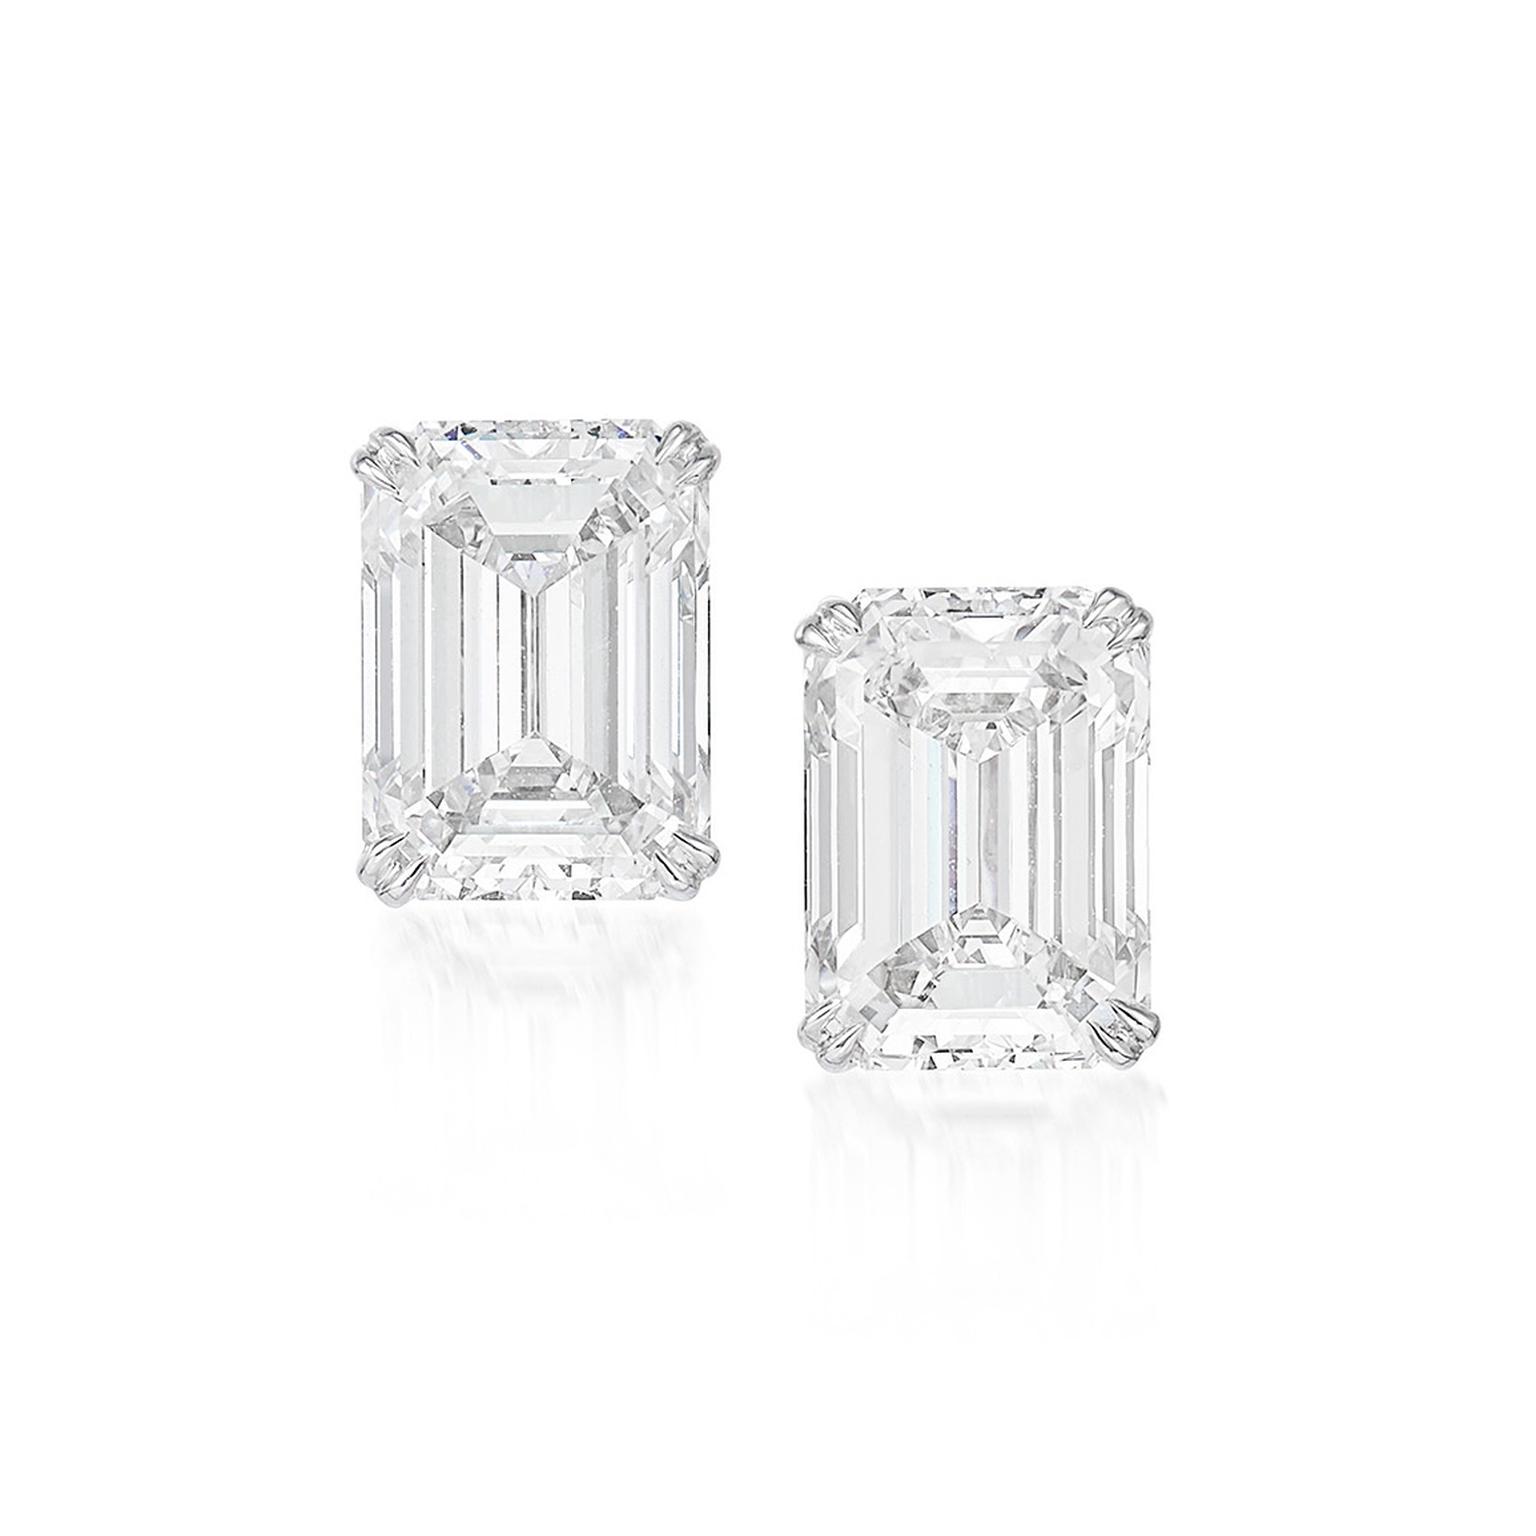 Lot 662 - A Pair of 3.05 and 3.13 Carats D-Flawless Diamond Ear Studs - Phillips Auction 5 June 2021 